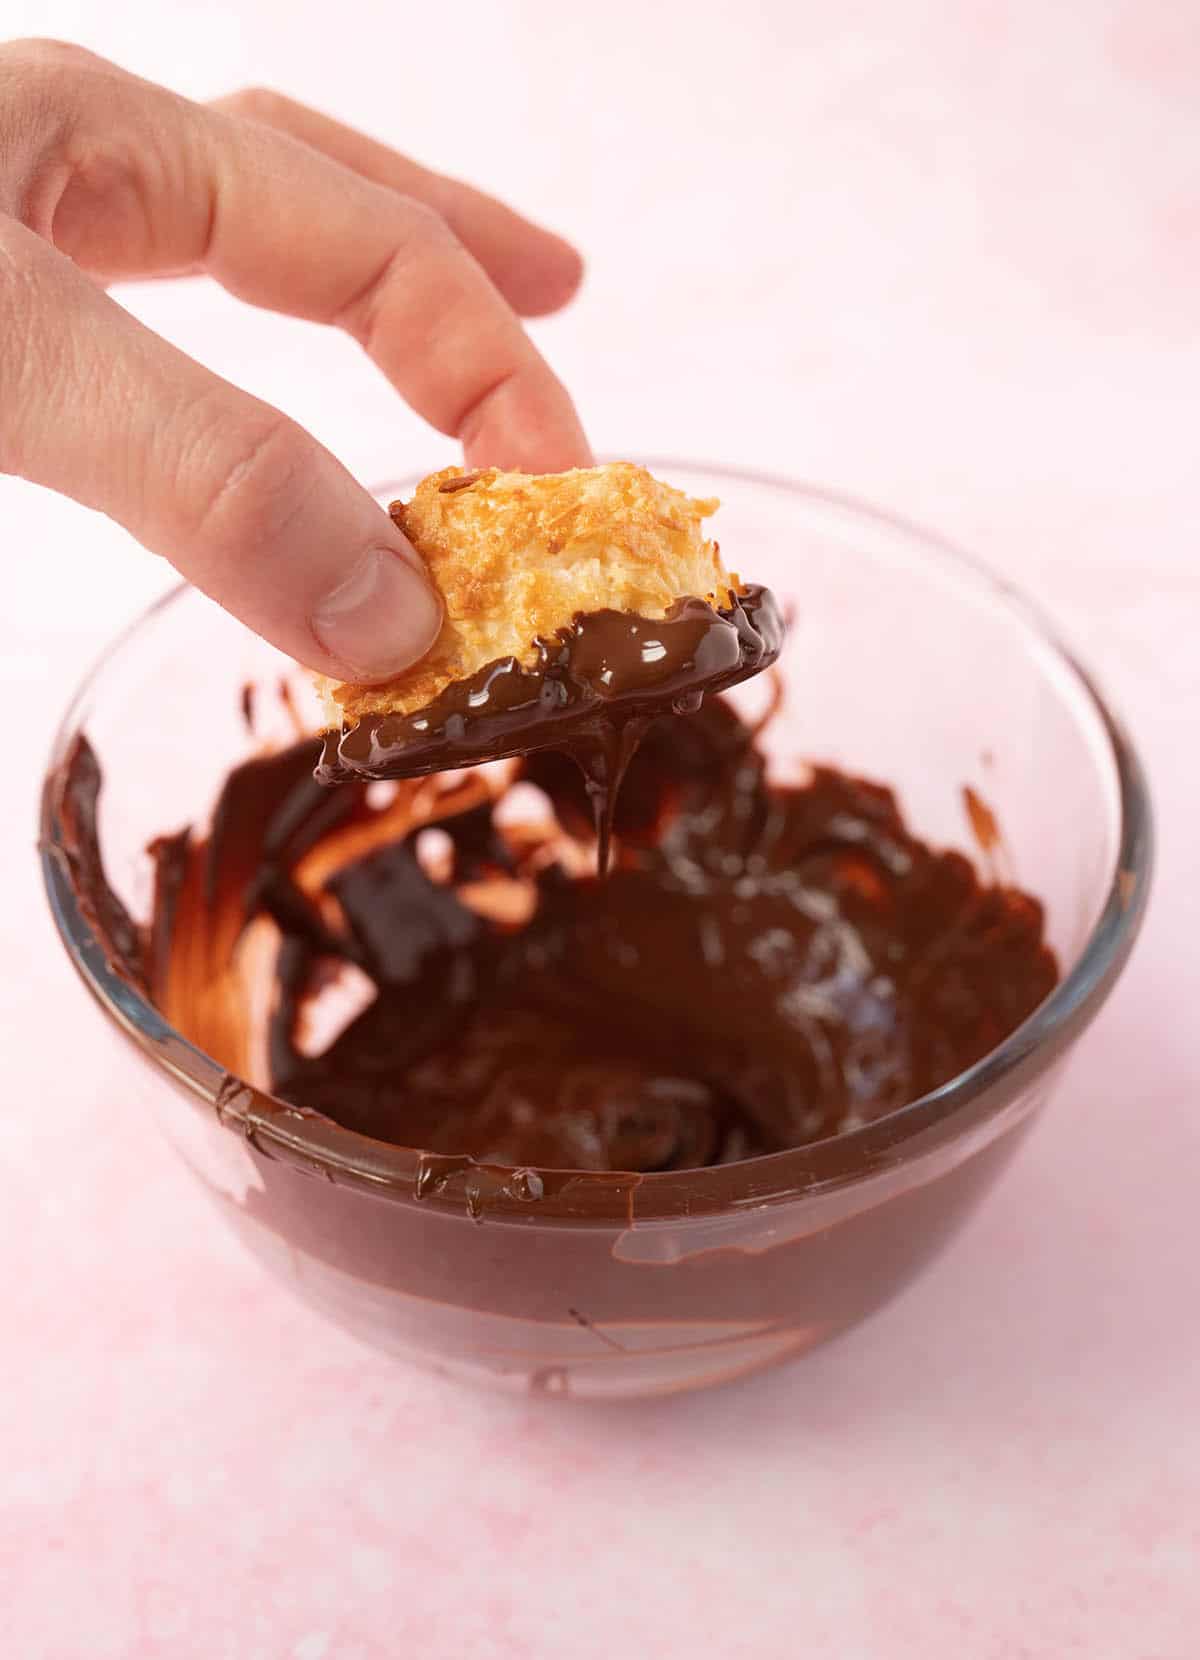 A hand dipping a Coconut Macaroon in a bowlful of melted chocolate.